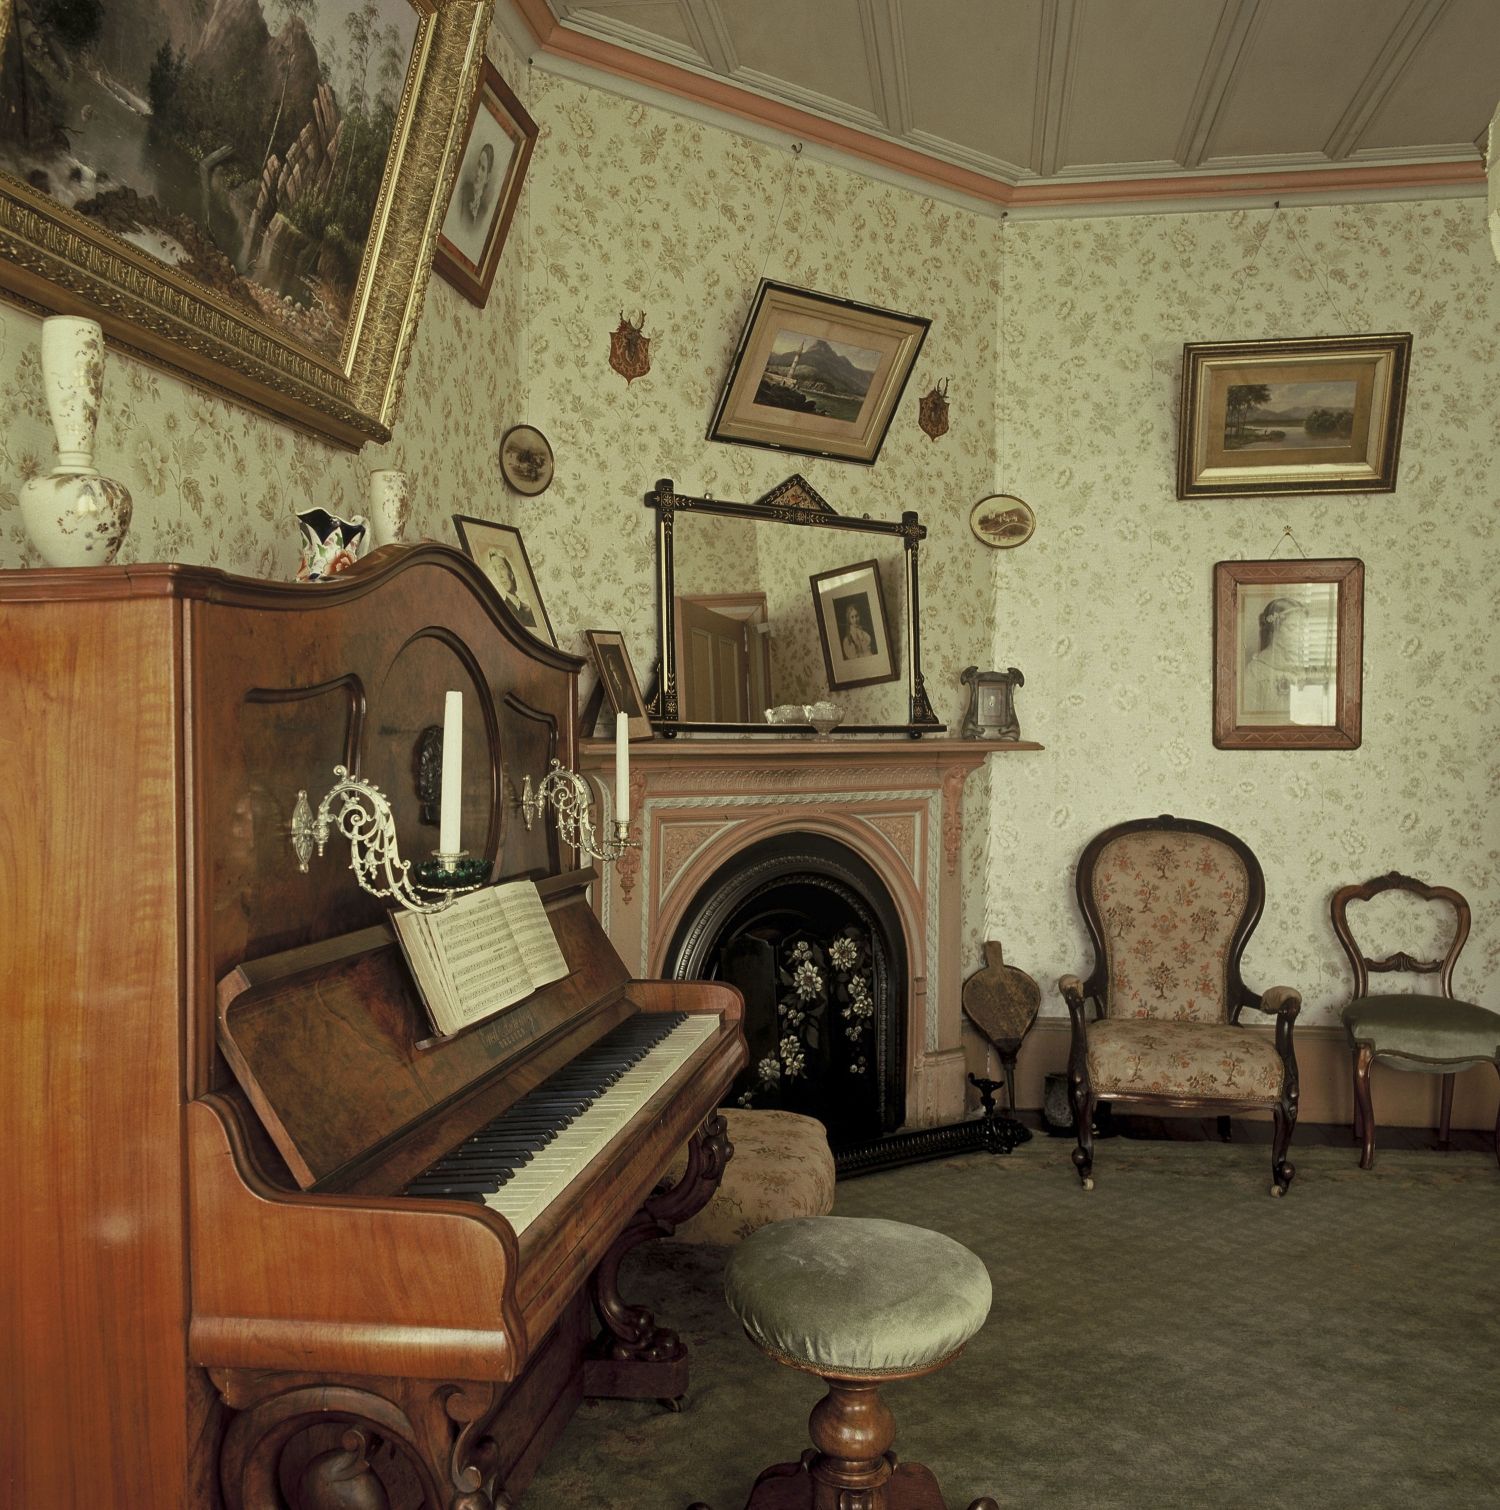 Colour photo of room with piano, fireplace, chairs, ornaments and frame pictures on wallpapered walls.